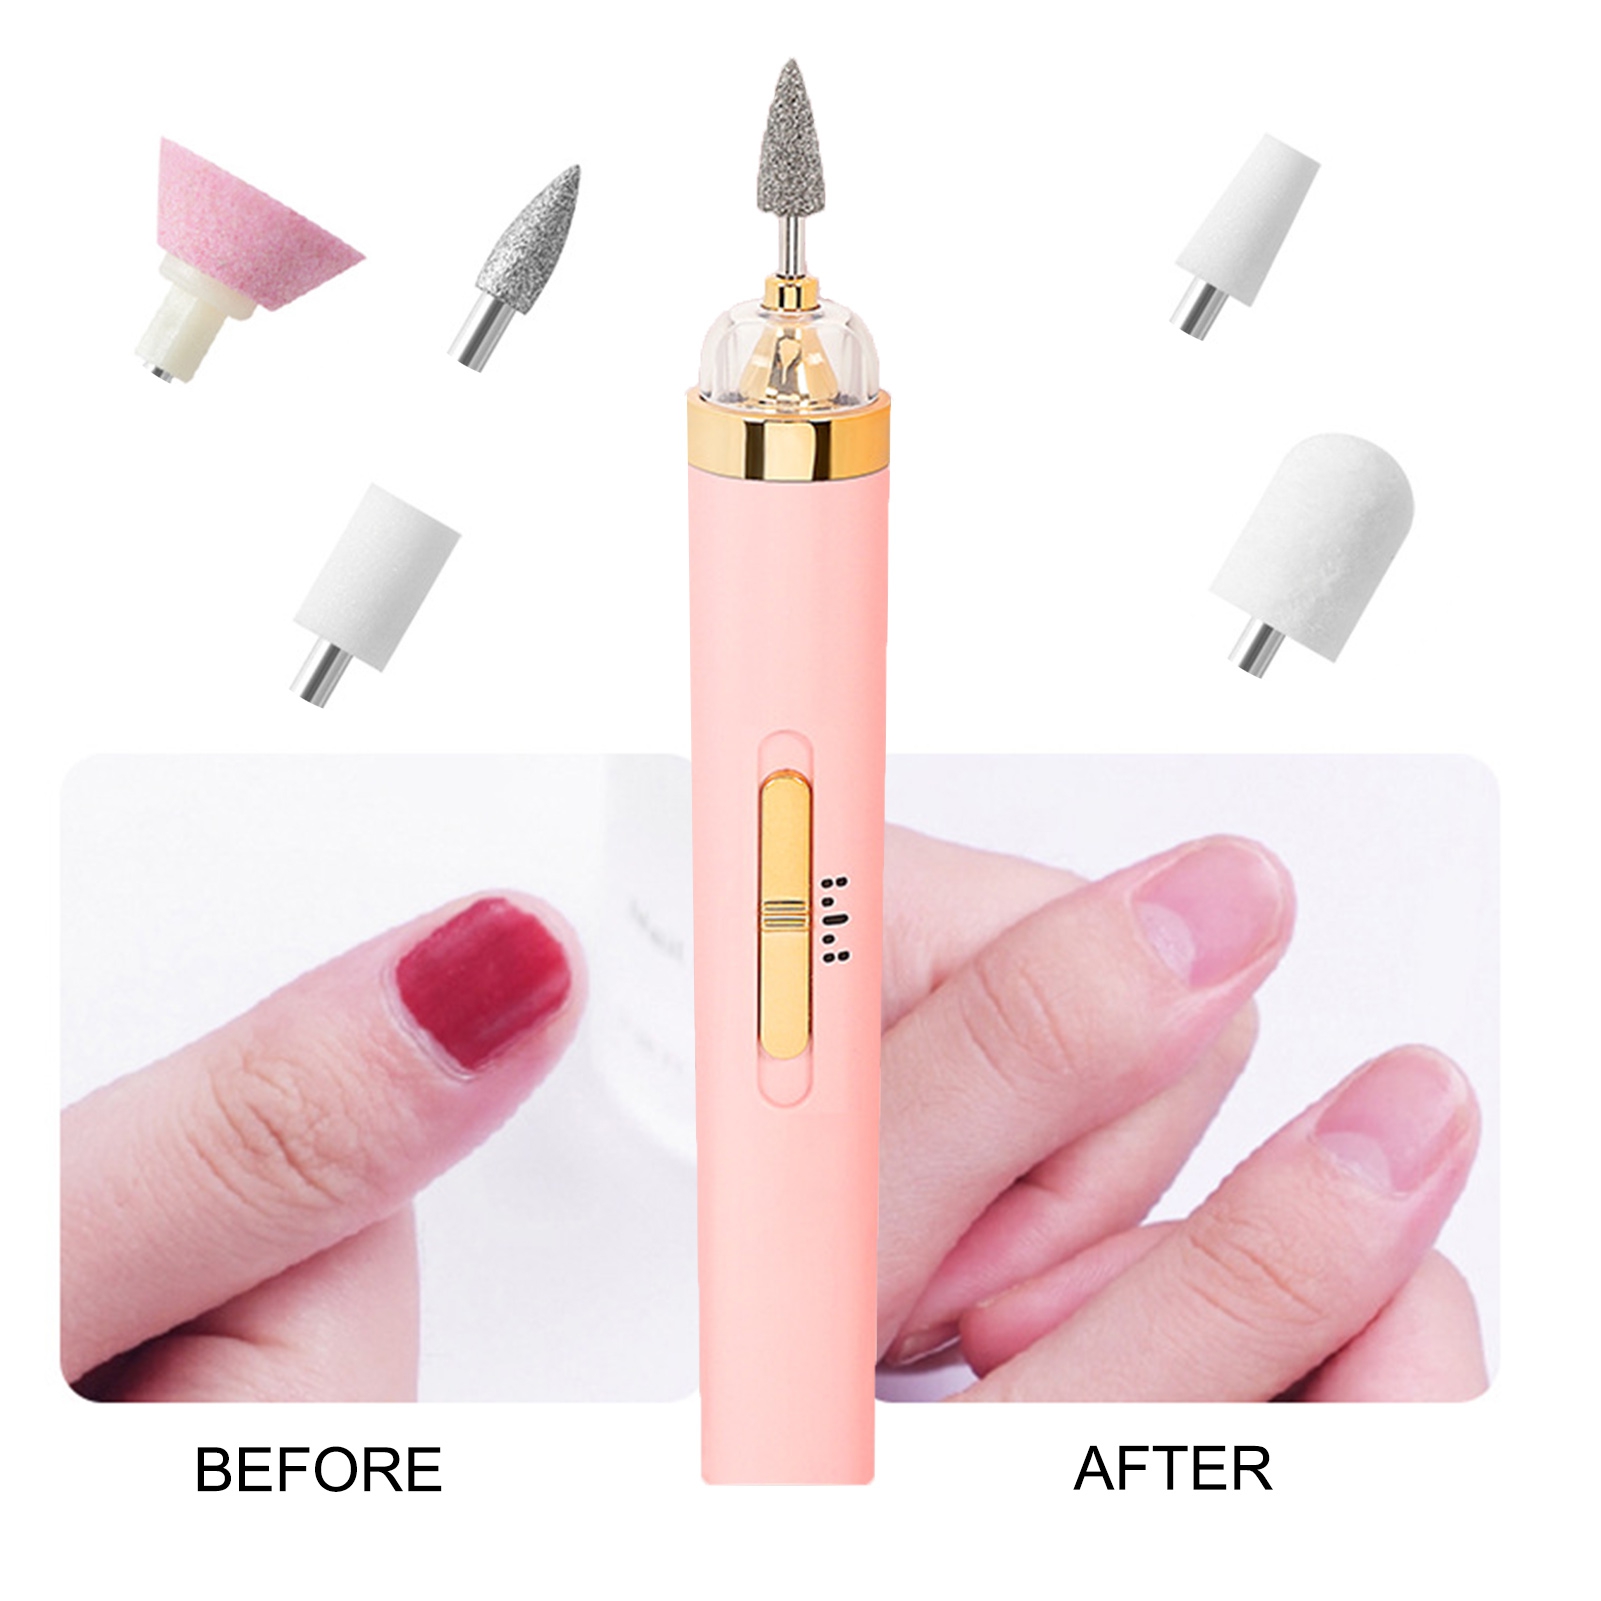 Nail Polisher Fashion Appearance Usb Cable Low Noise Useful For Girls